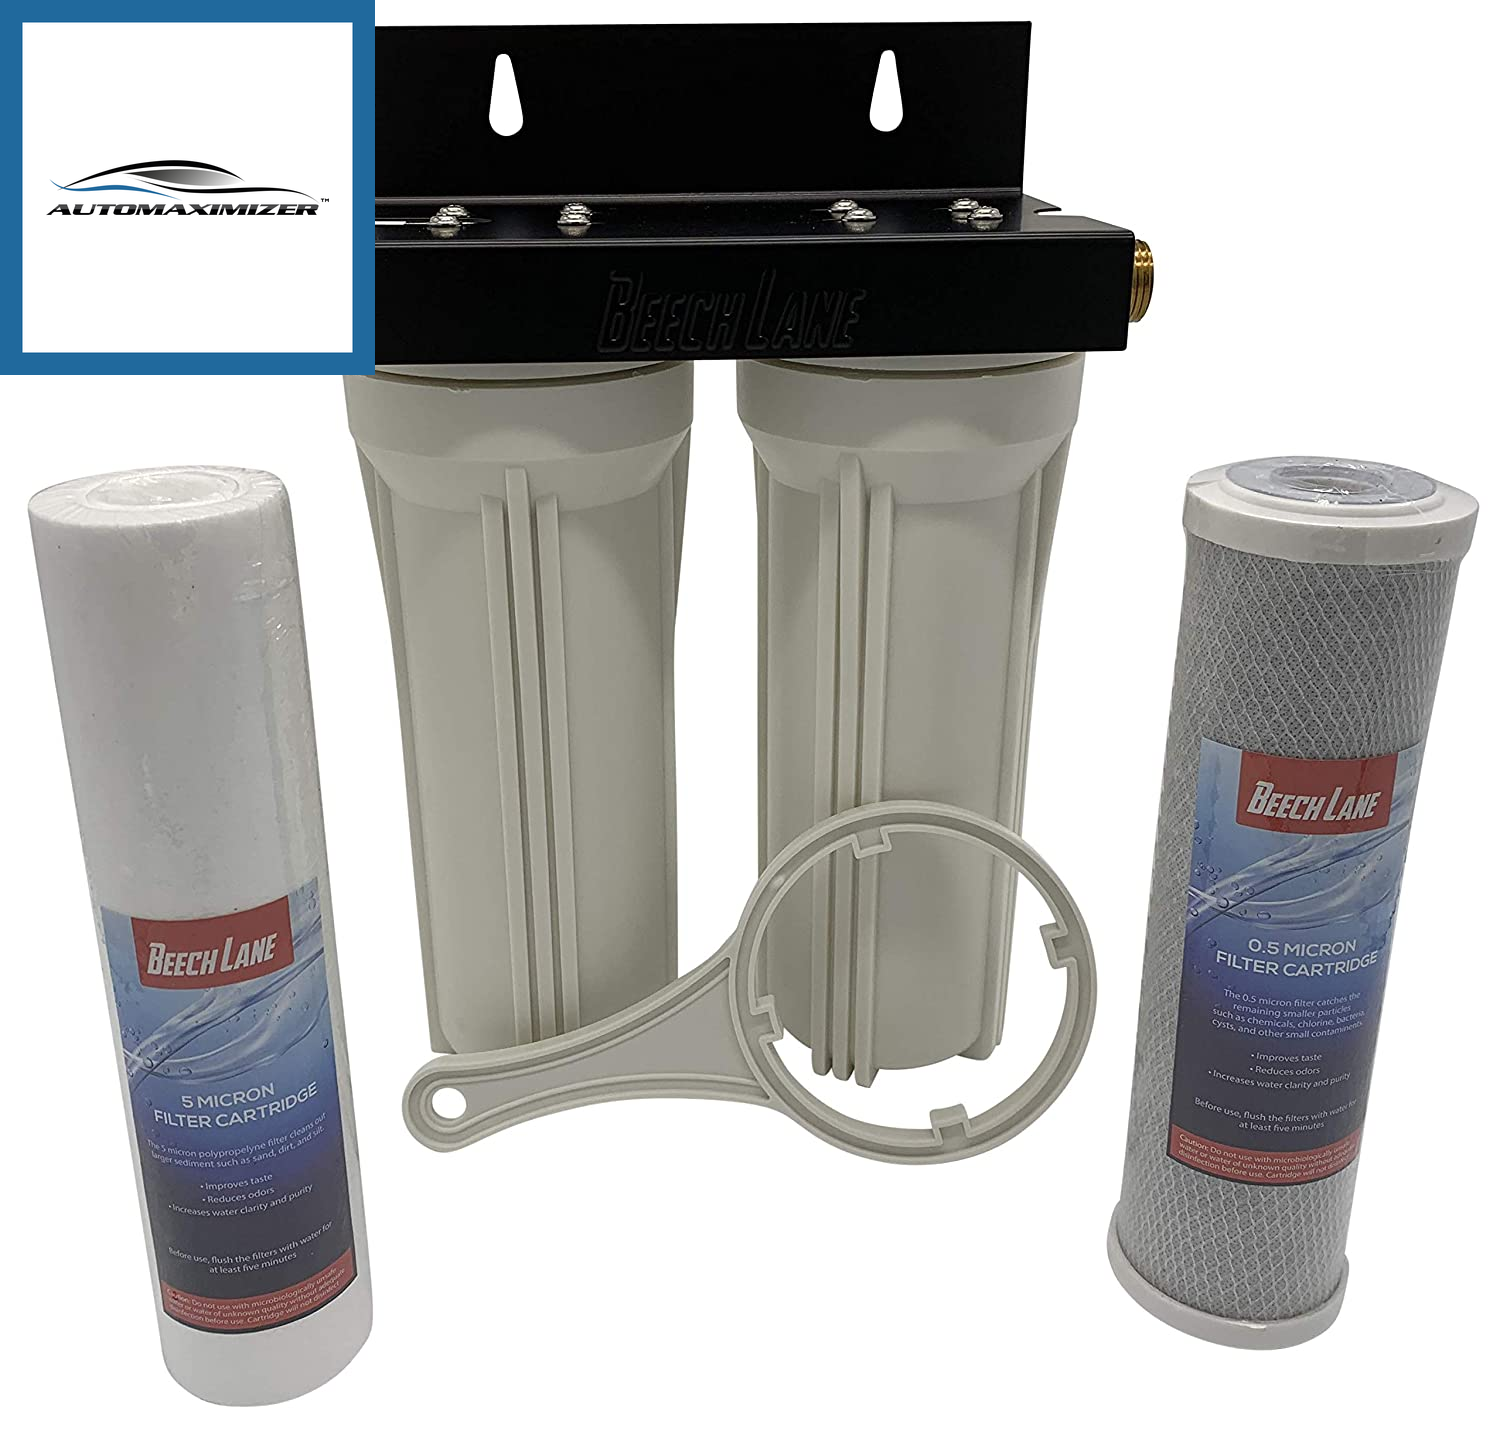 External RV Dual Water Filter System, Leak-Free Brass Fittings, Mounting Bracket and Two Filters Included, Sturdy Construction Is Built to Last